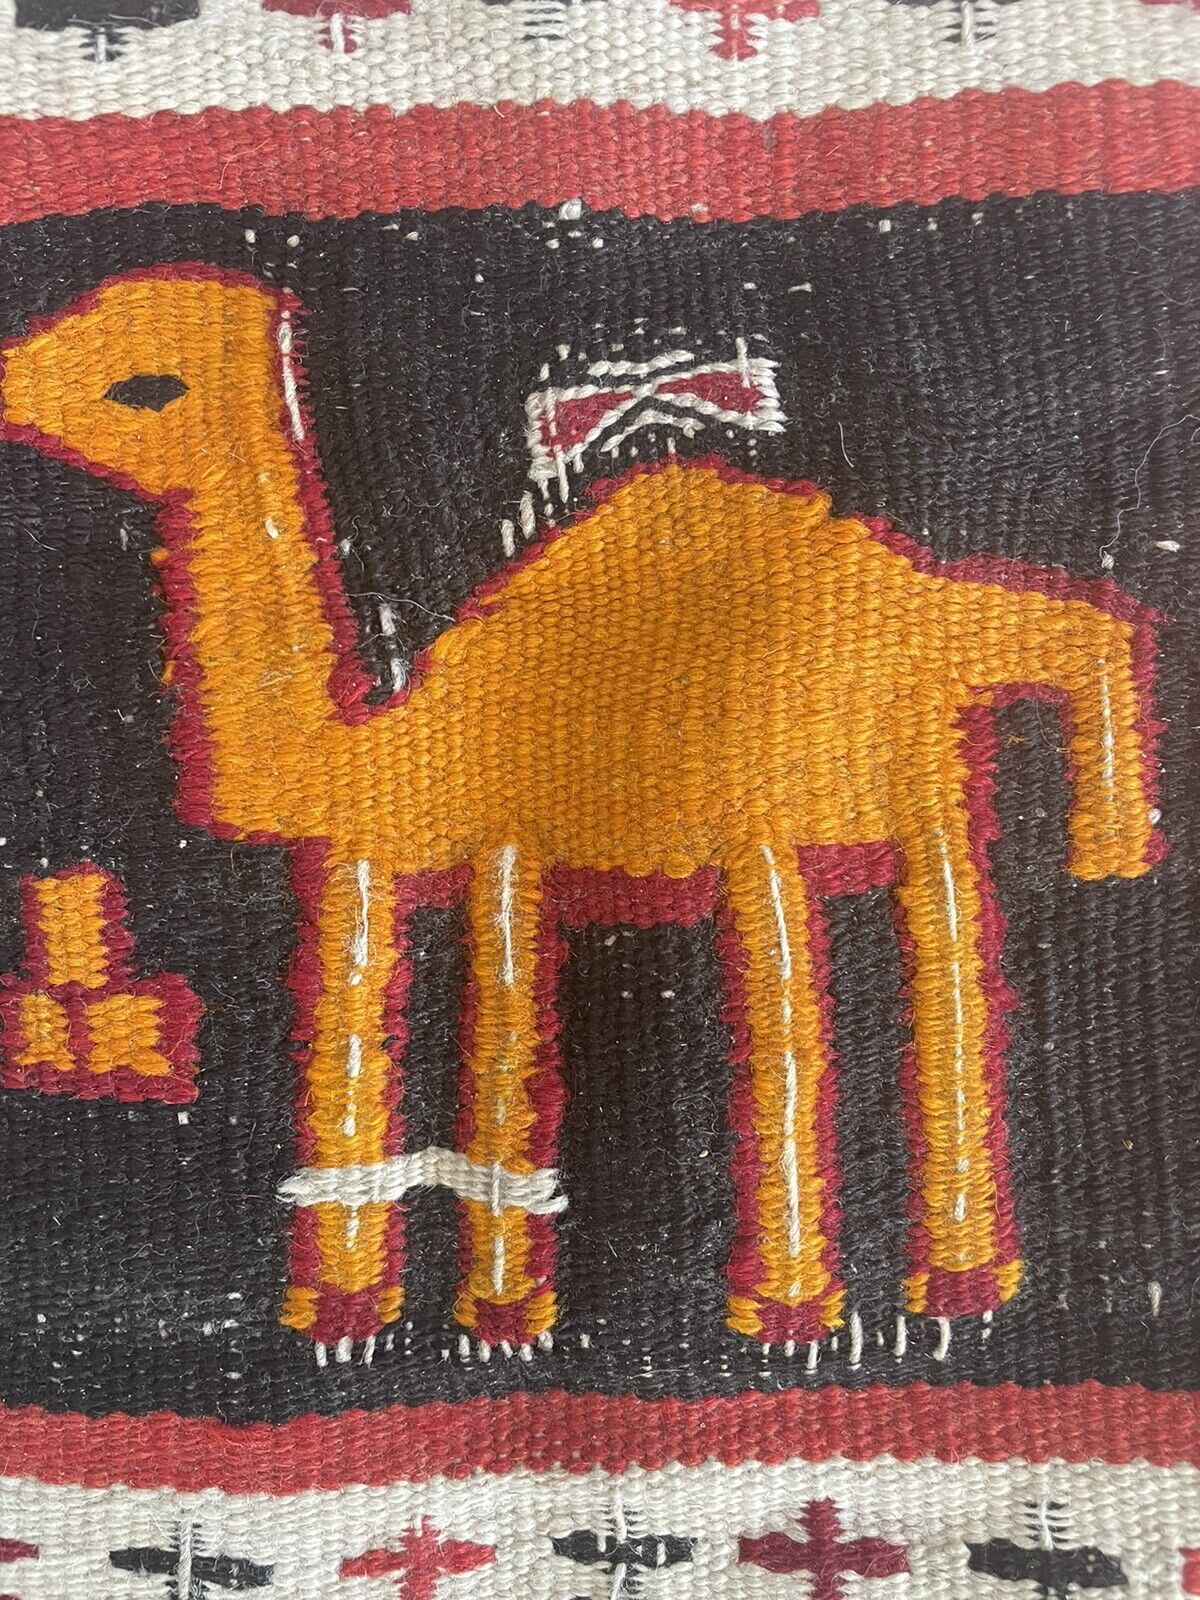 Close-up of cultural heritage on Handmade Antique Moroccan Berber Kilim Rug - Detailed view showcasing the rug's cultural heritage and connection to the Berber people and Moroccan tradition.